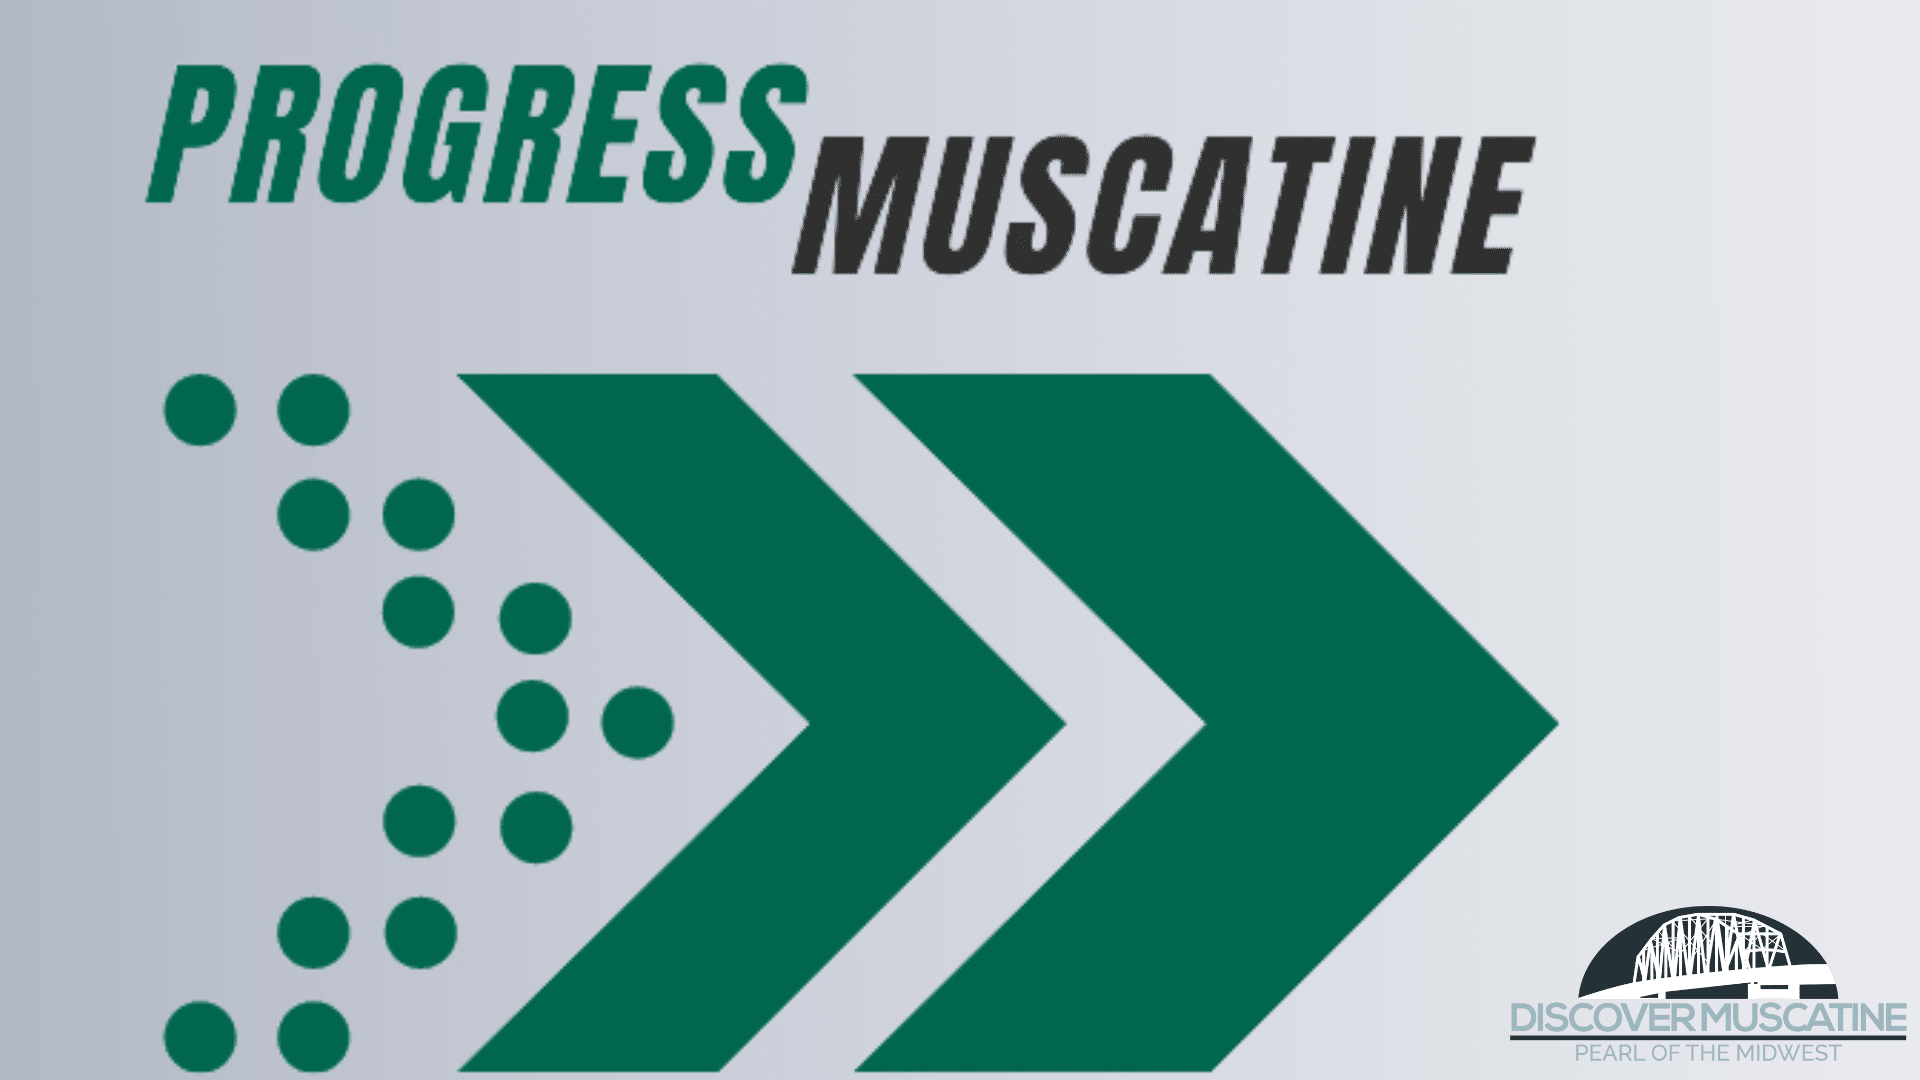 Progress Muscatine requests MPW improve transparency